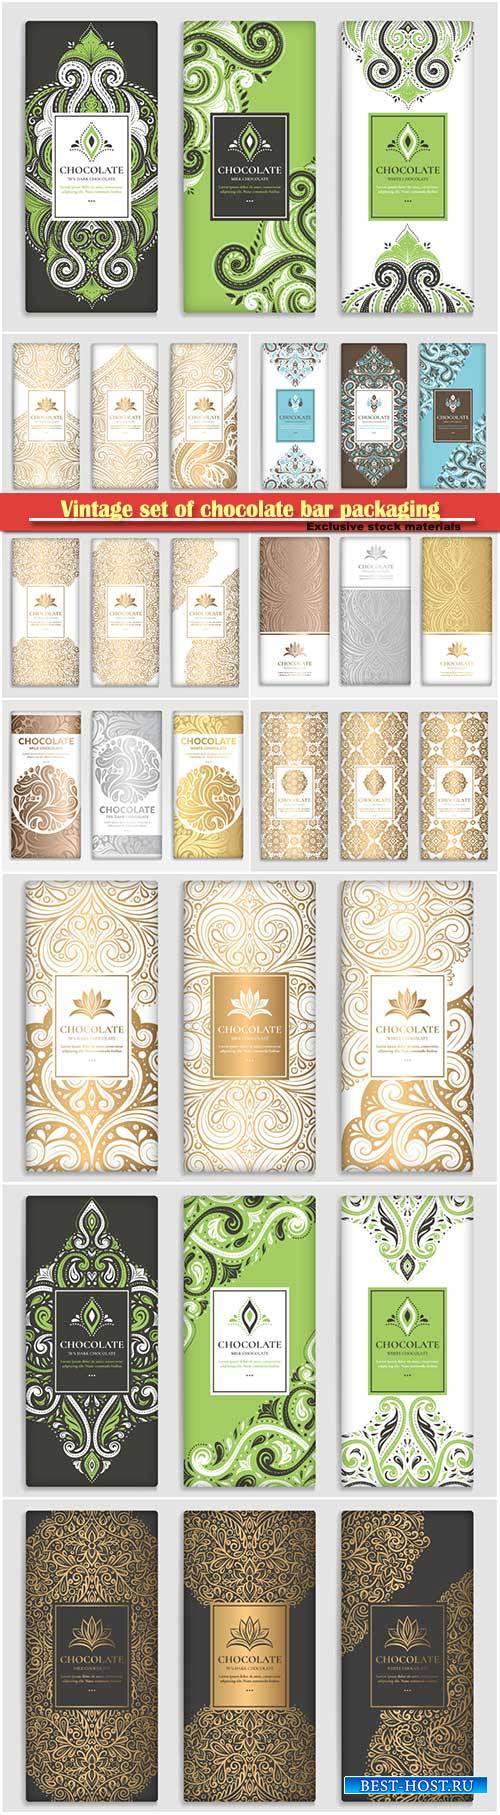 Vintage set of chocolate bar packaging design, vector luxury template with  ...